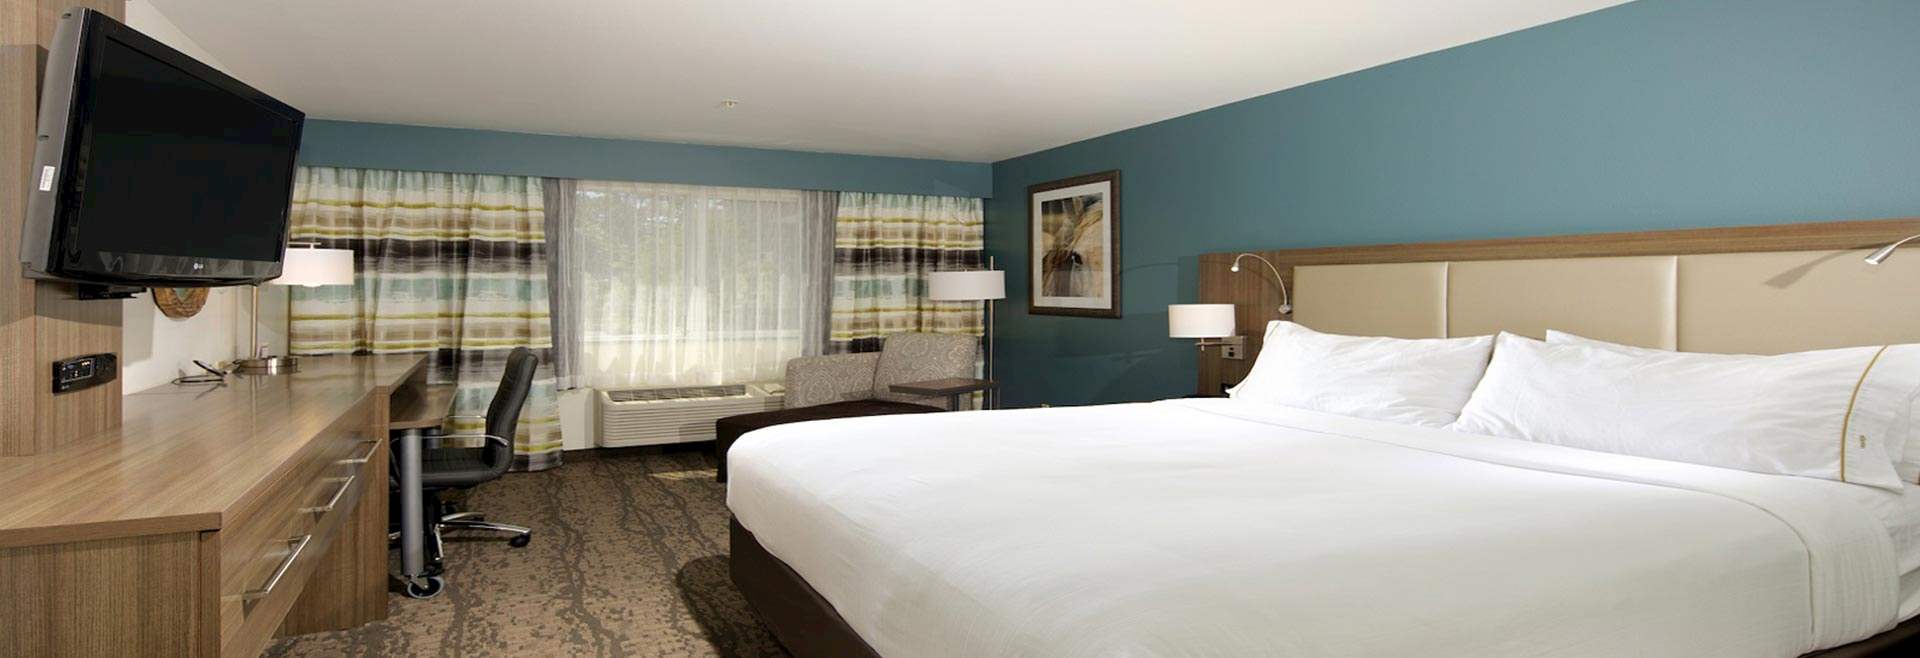 Accommodations at Holiday Inn Express Hotel & Suites - Paso Robles